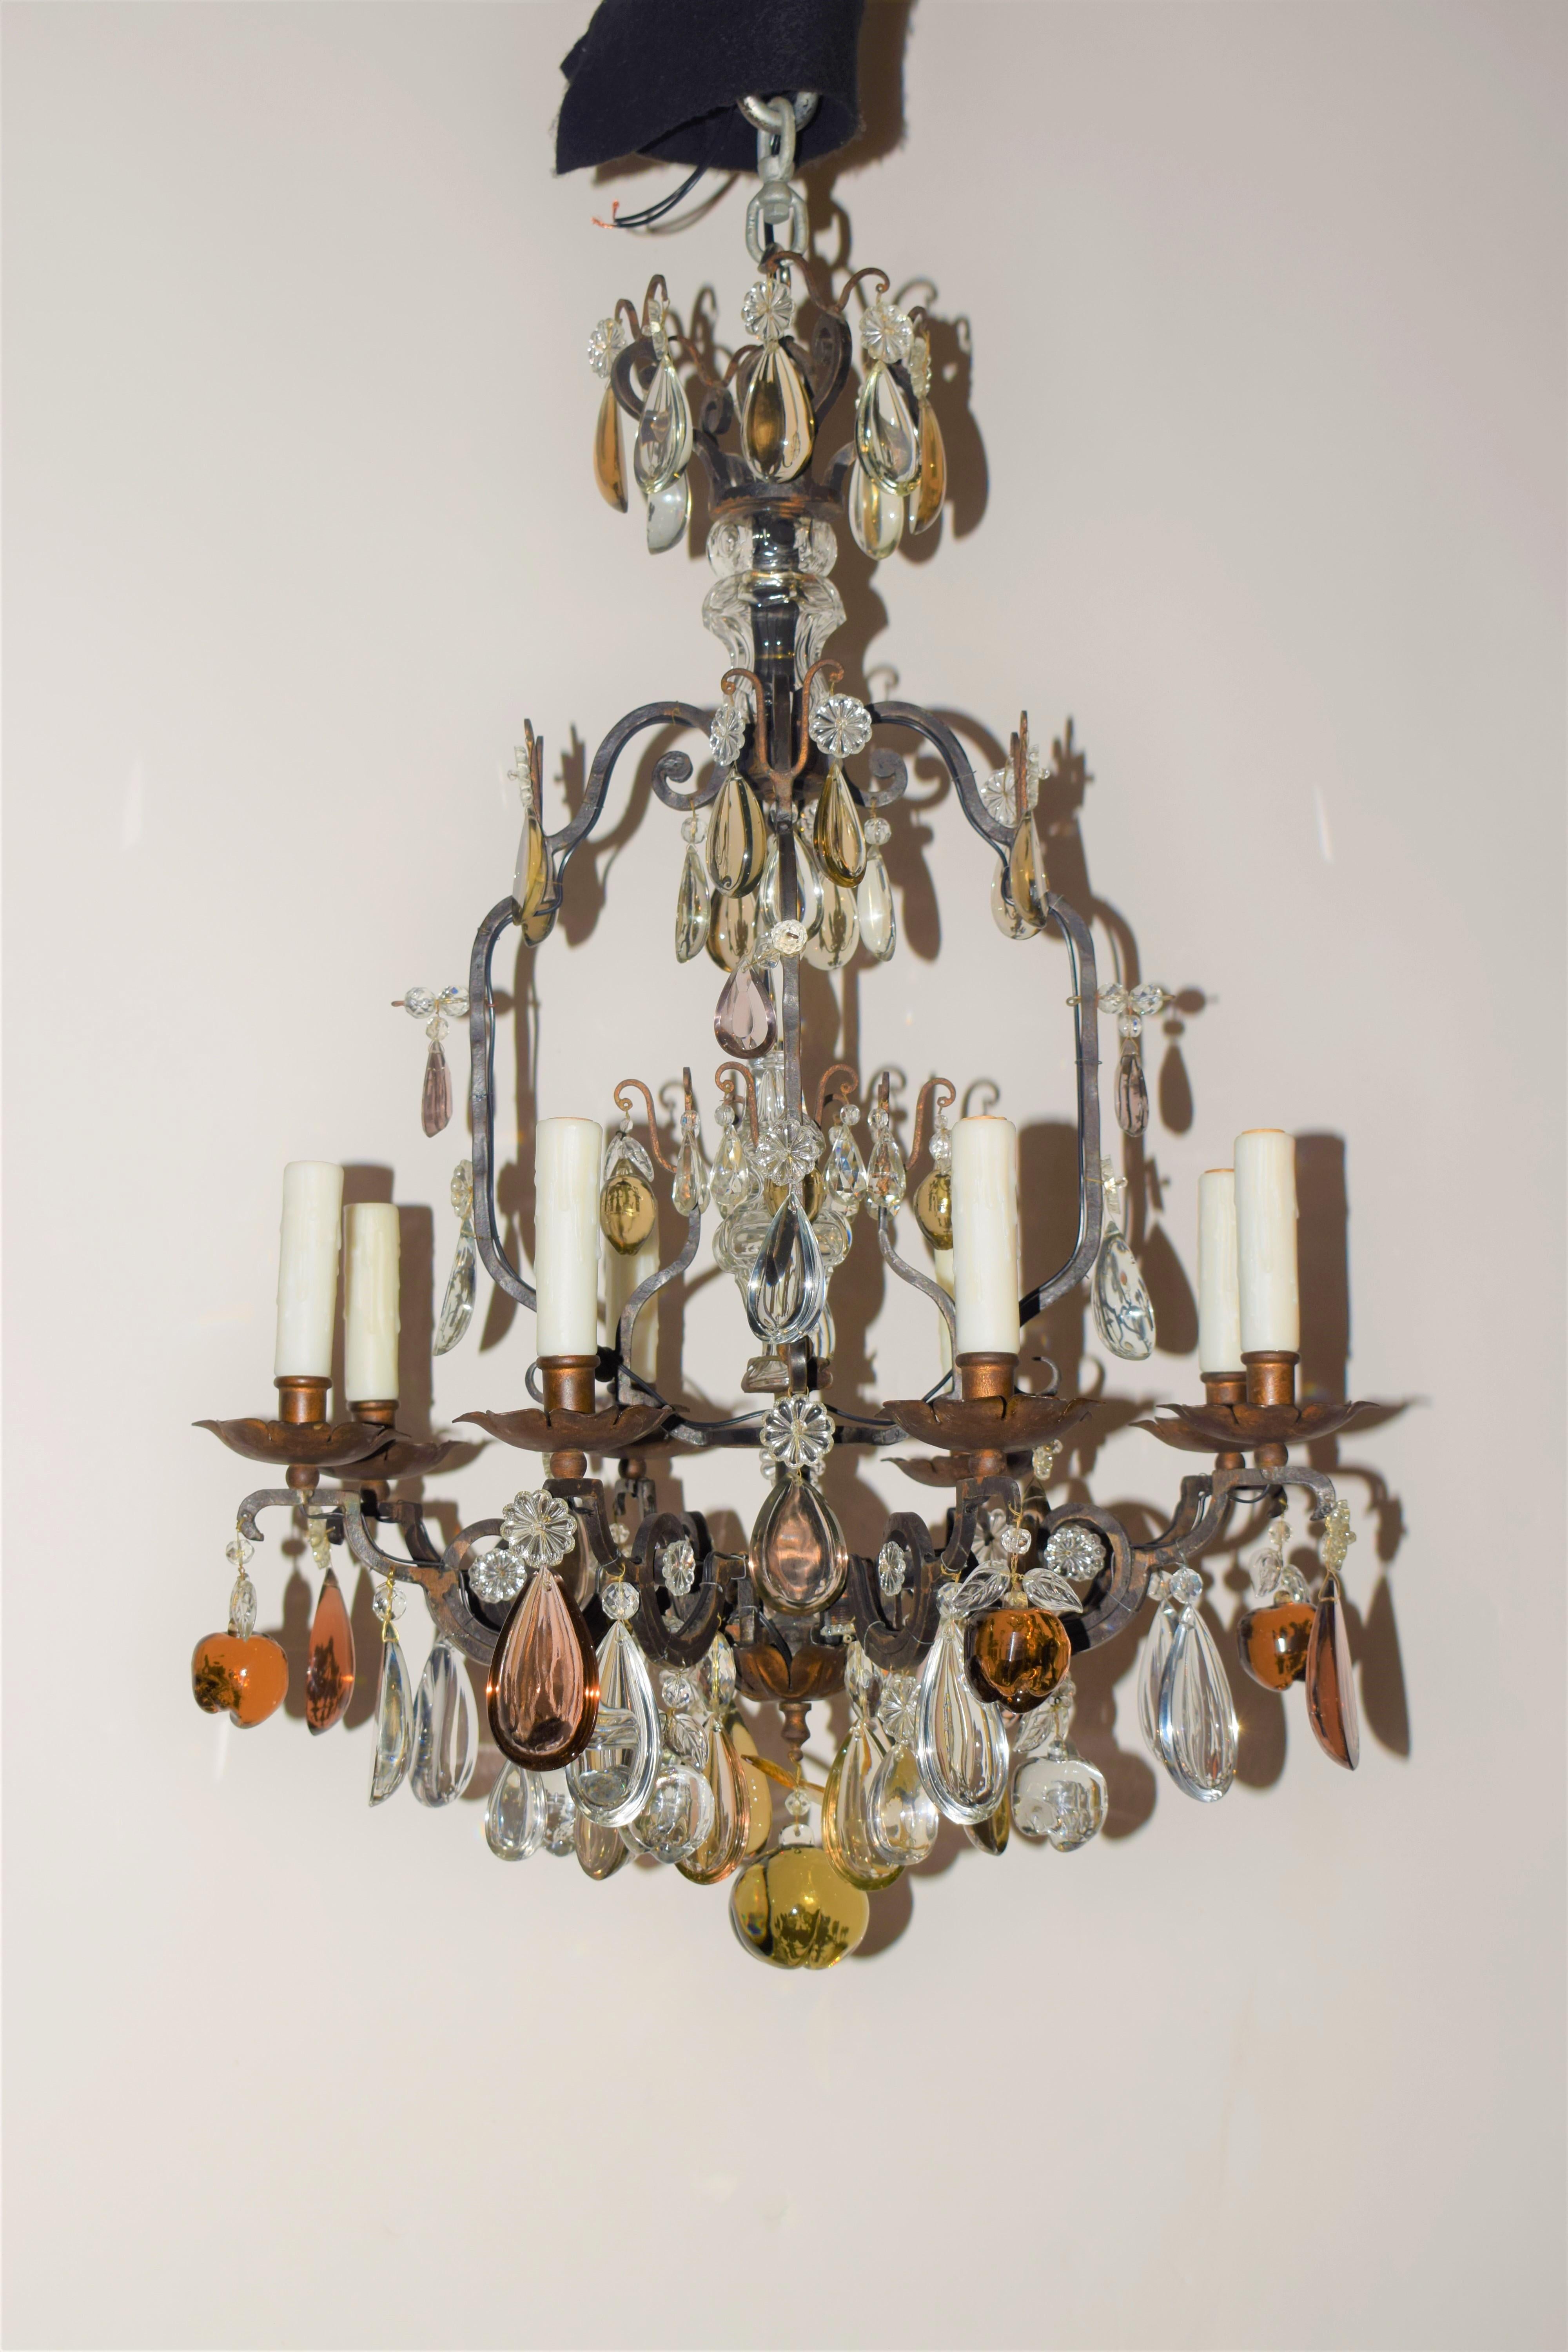 A very fine Louis XV style iron chandelier featuring hand cut Crystal Pendalogues & Fruits. France, circa 1900. 8 Lights.
Dimensions: height 33